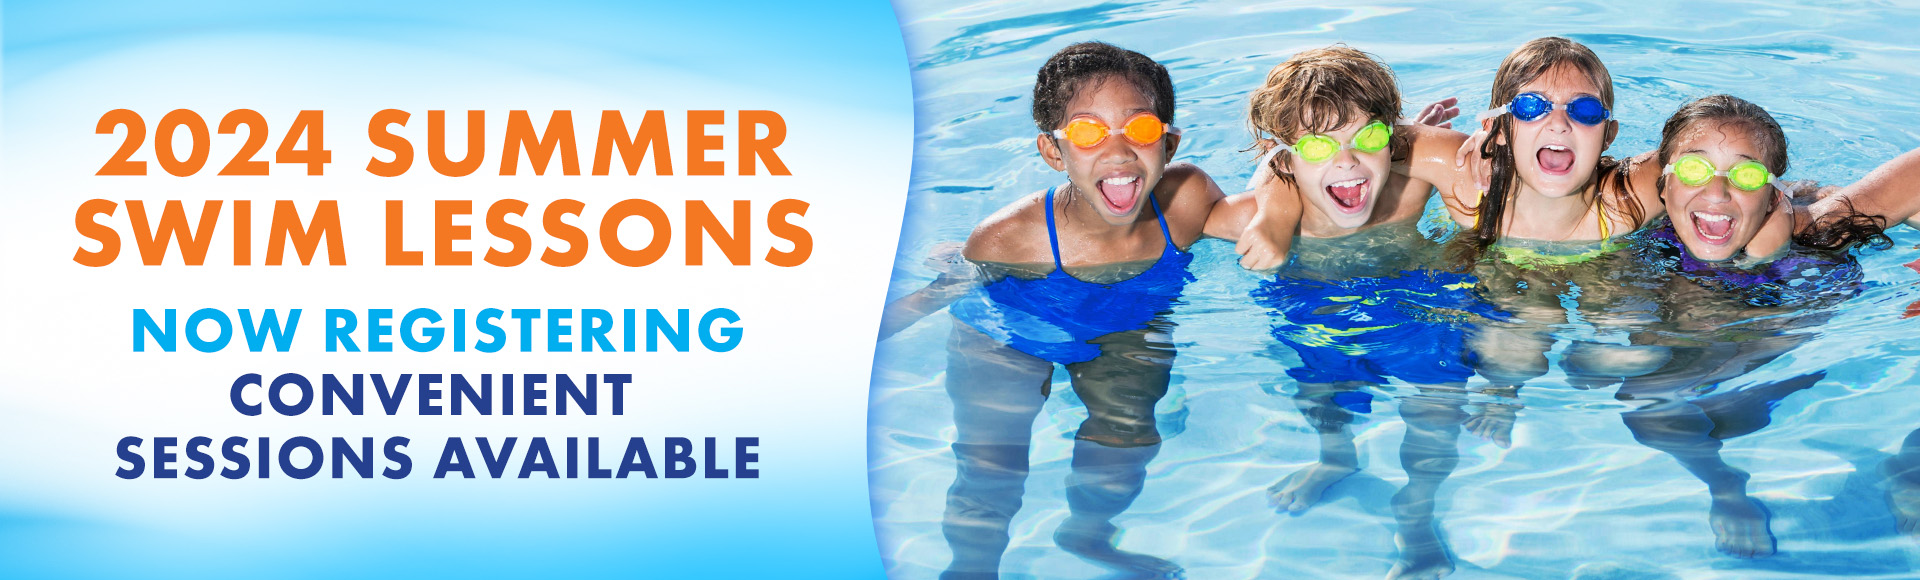 2024 Summer Swim Lessons. Now registering. Convenient sessions available. Photo of four elementary-aged kids grouped together in a pool with swim goggles.